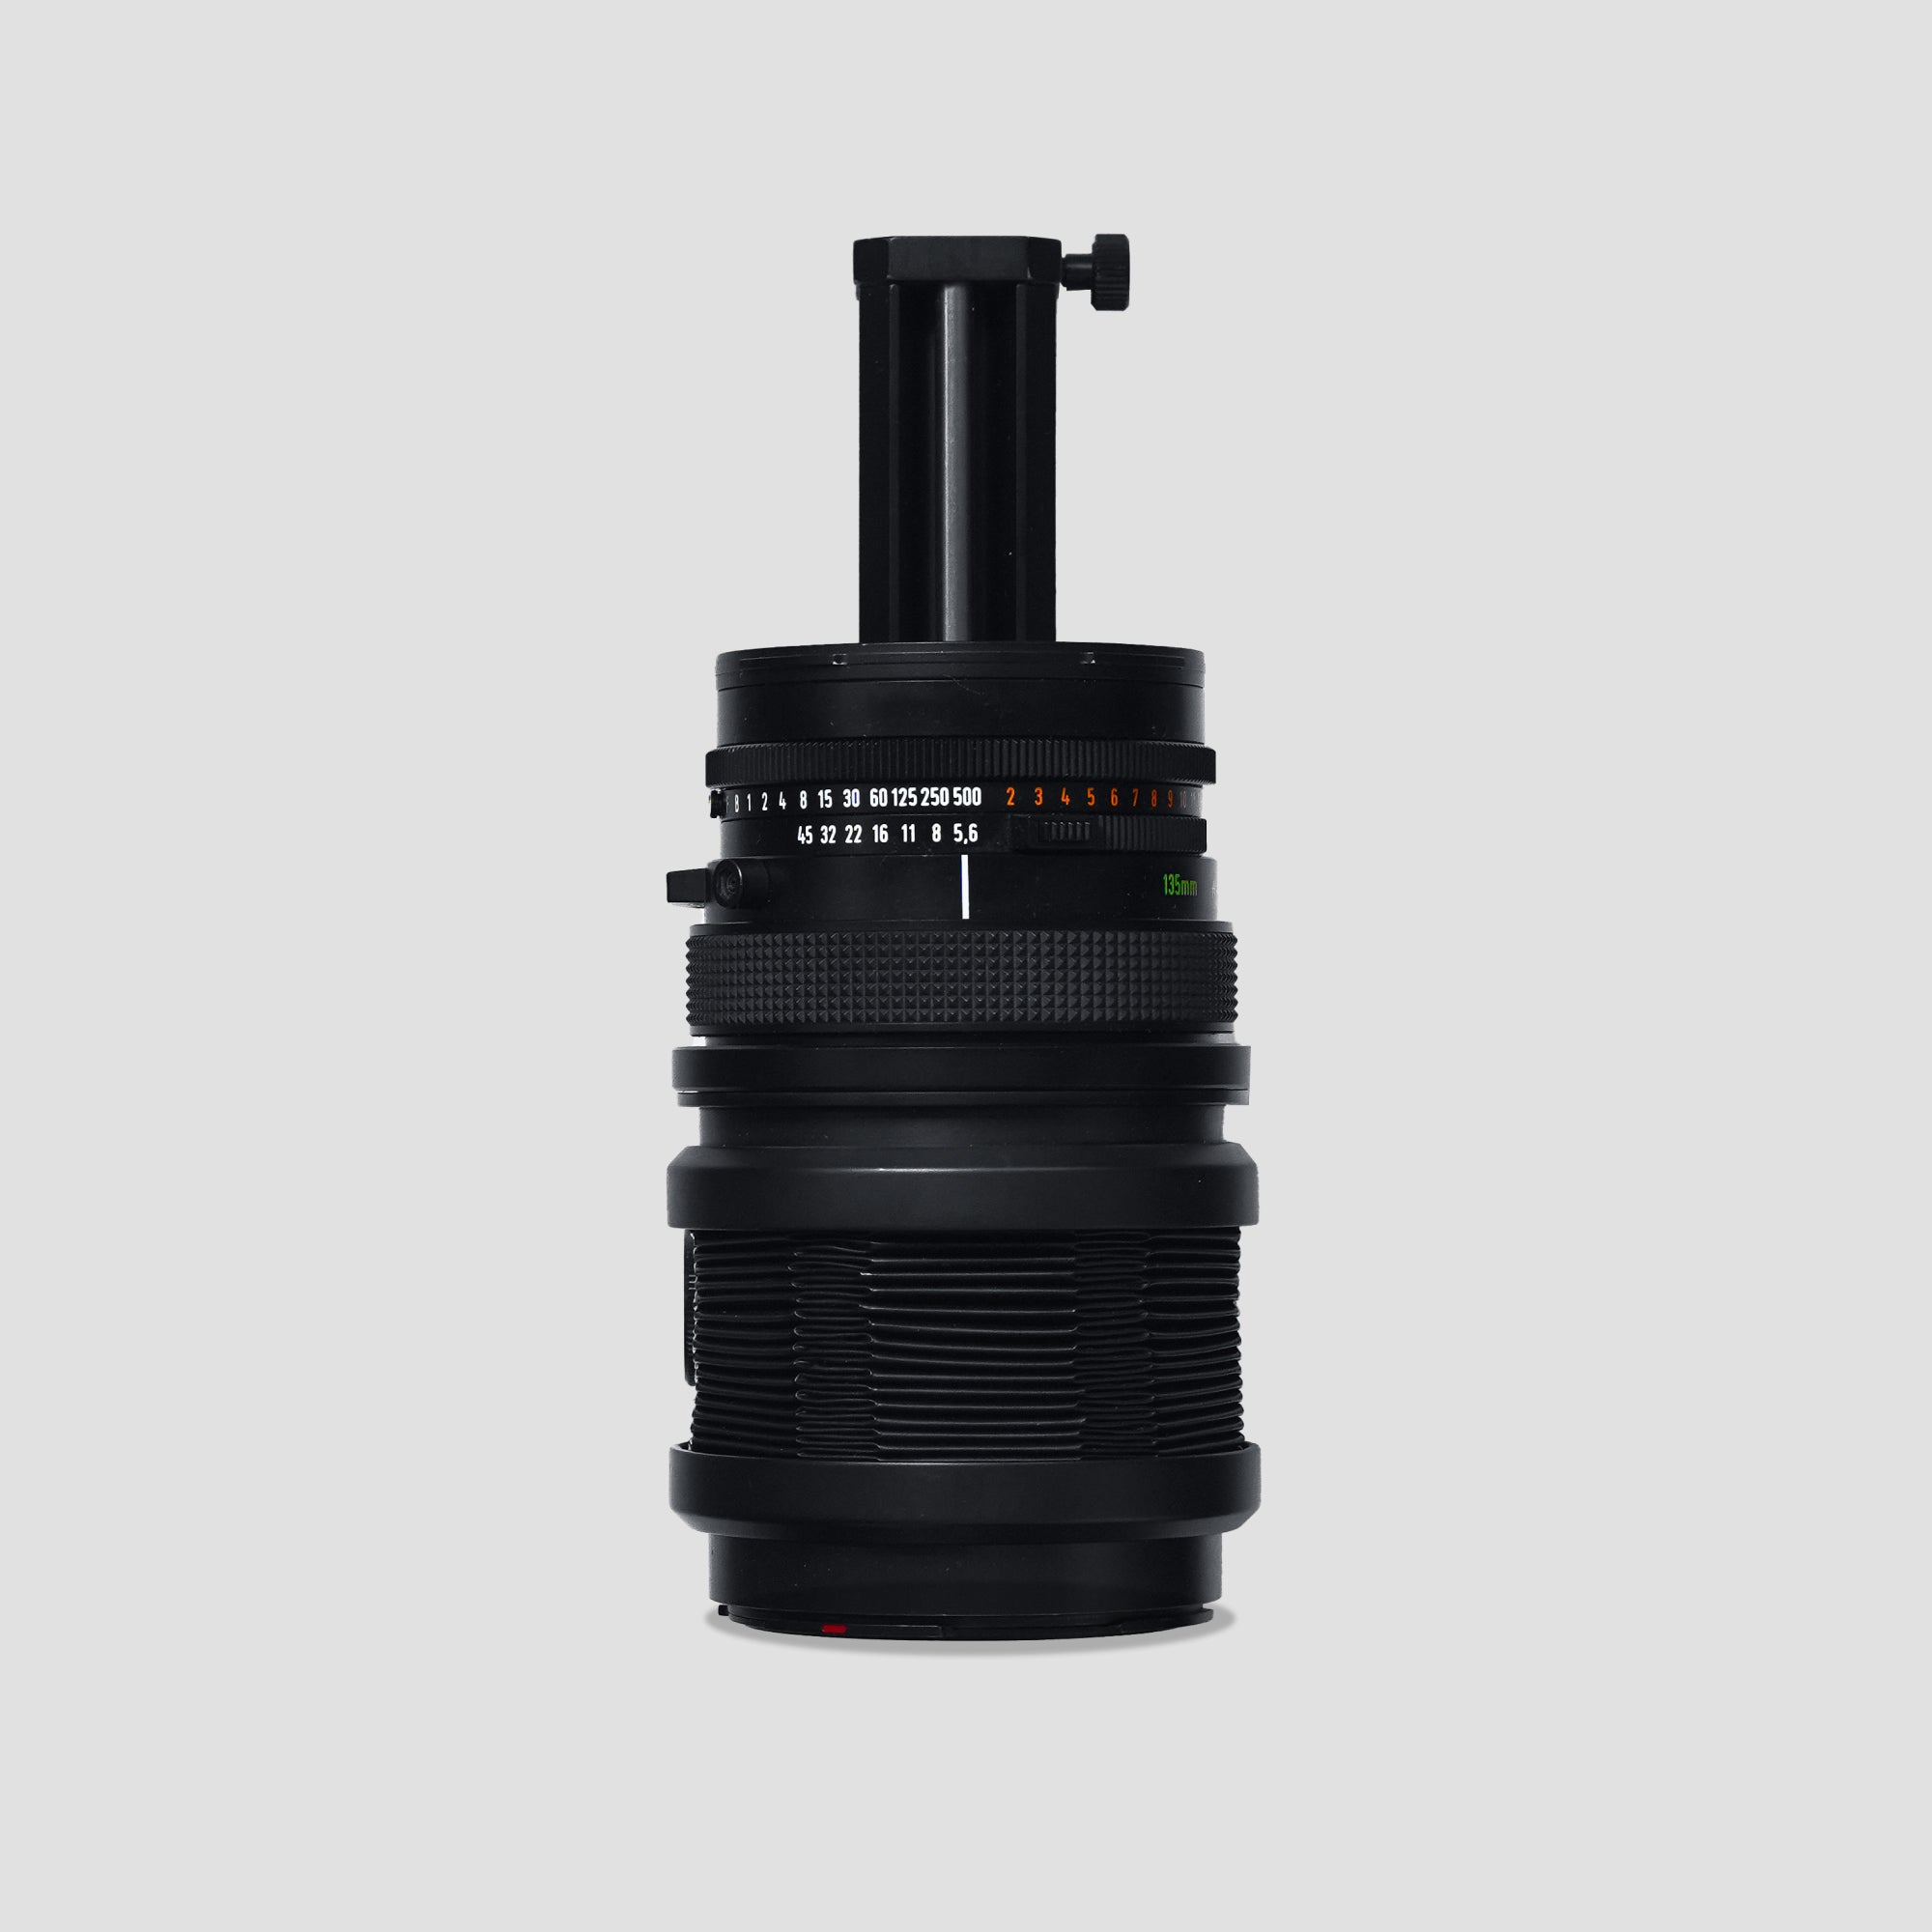 Buy Makro-Planar 135mm 1:5.6 now at Analogue Amsterdam